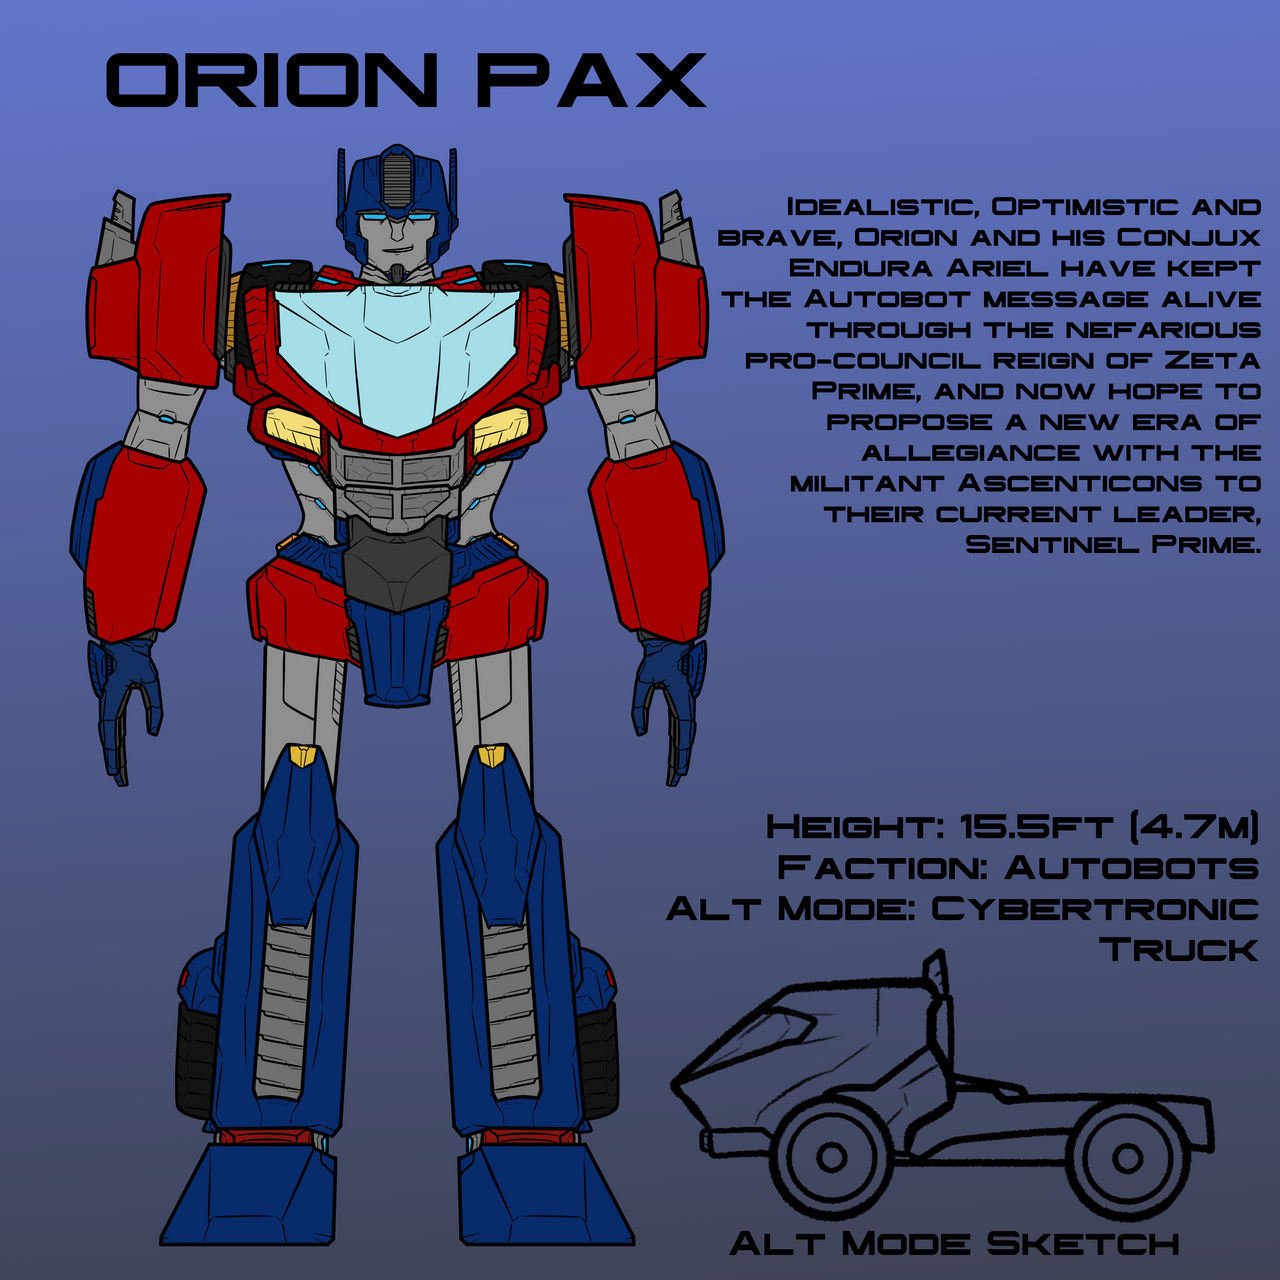 Transformers - Orion Pax () by MeekerV8 on DeviantArt